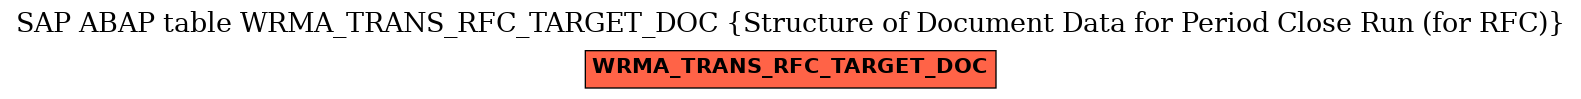 E-R Diagram for table WRMA_TRANS_RFC_TARGET_DOC (Structure of Document Data for Period Close Run (for RFC))